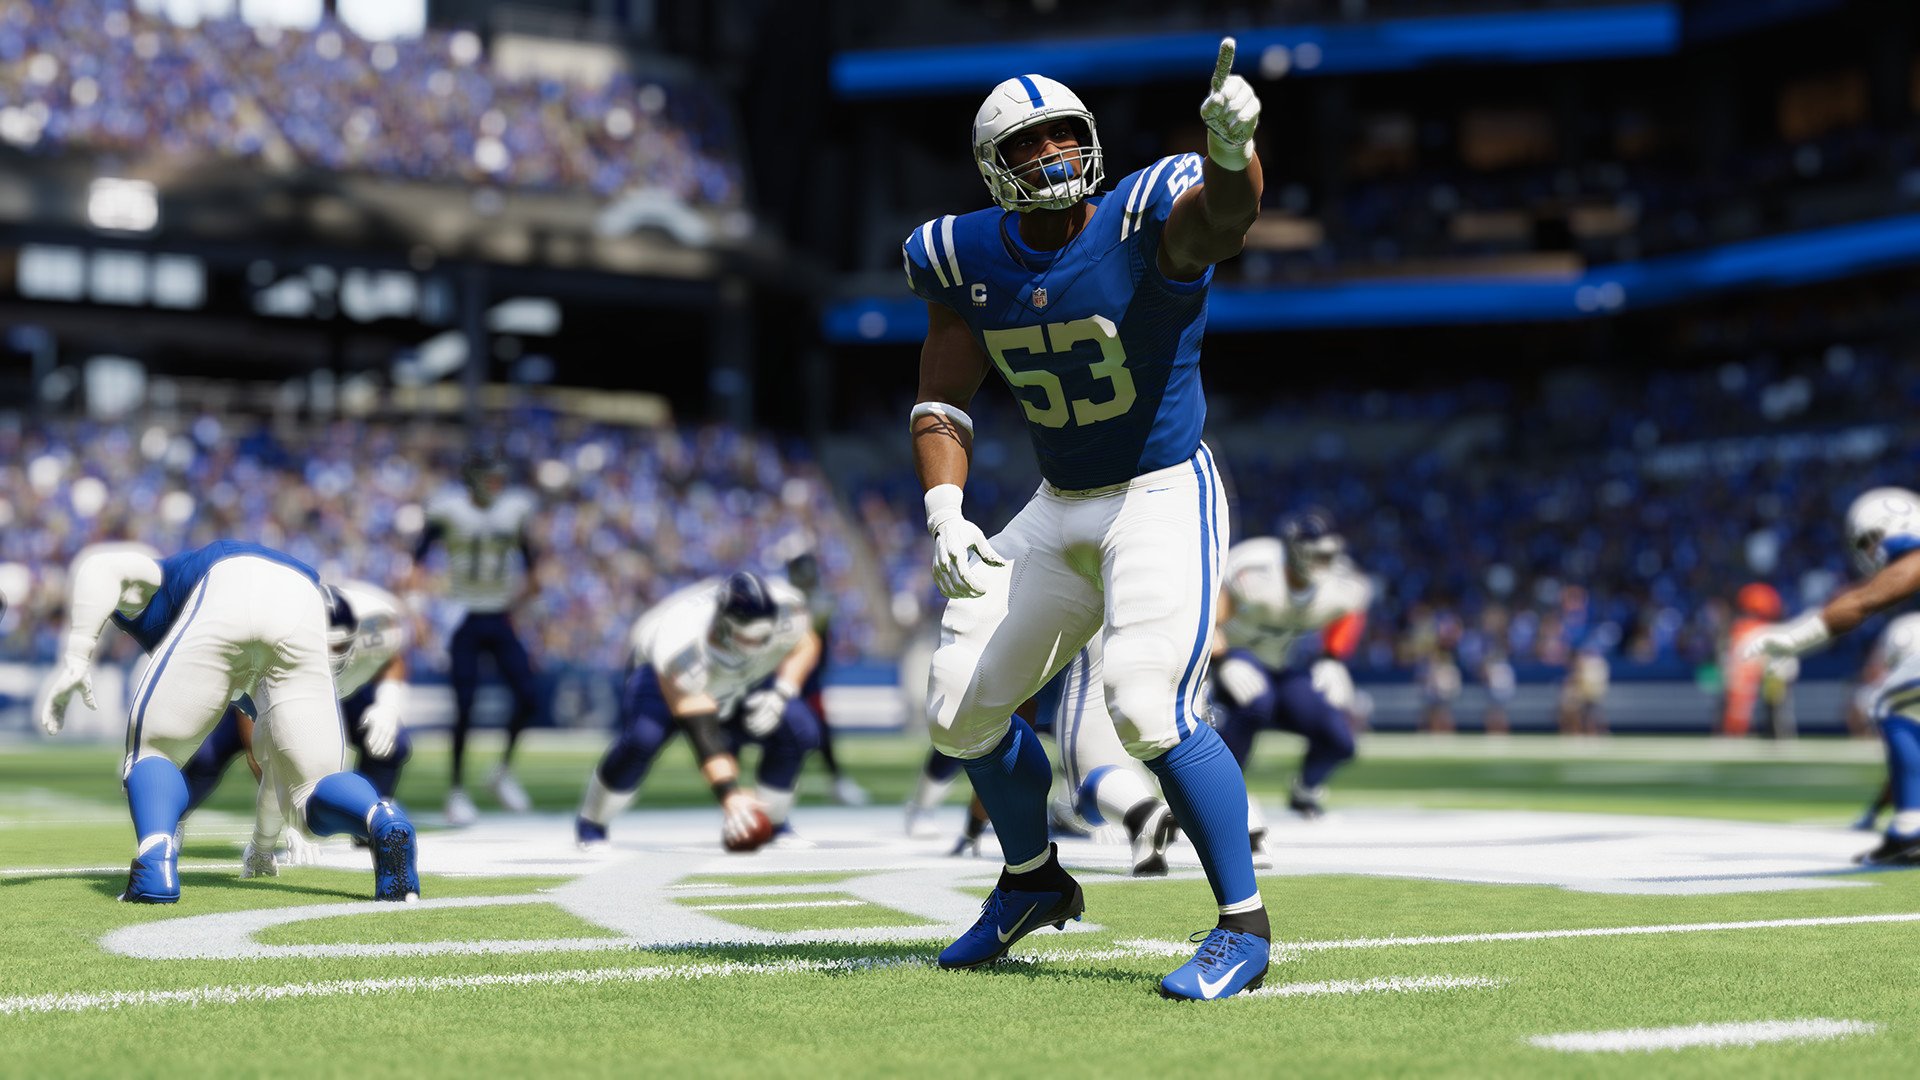 Madden NFL 23 is the best-selling video game for the U.S. in August 2022